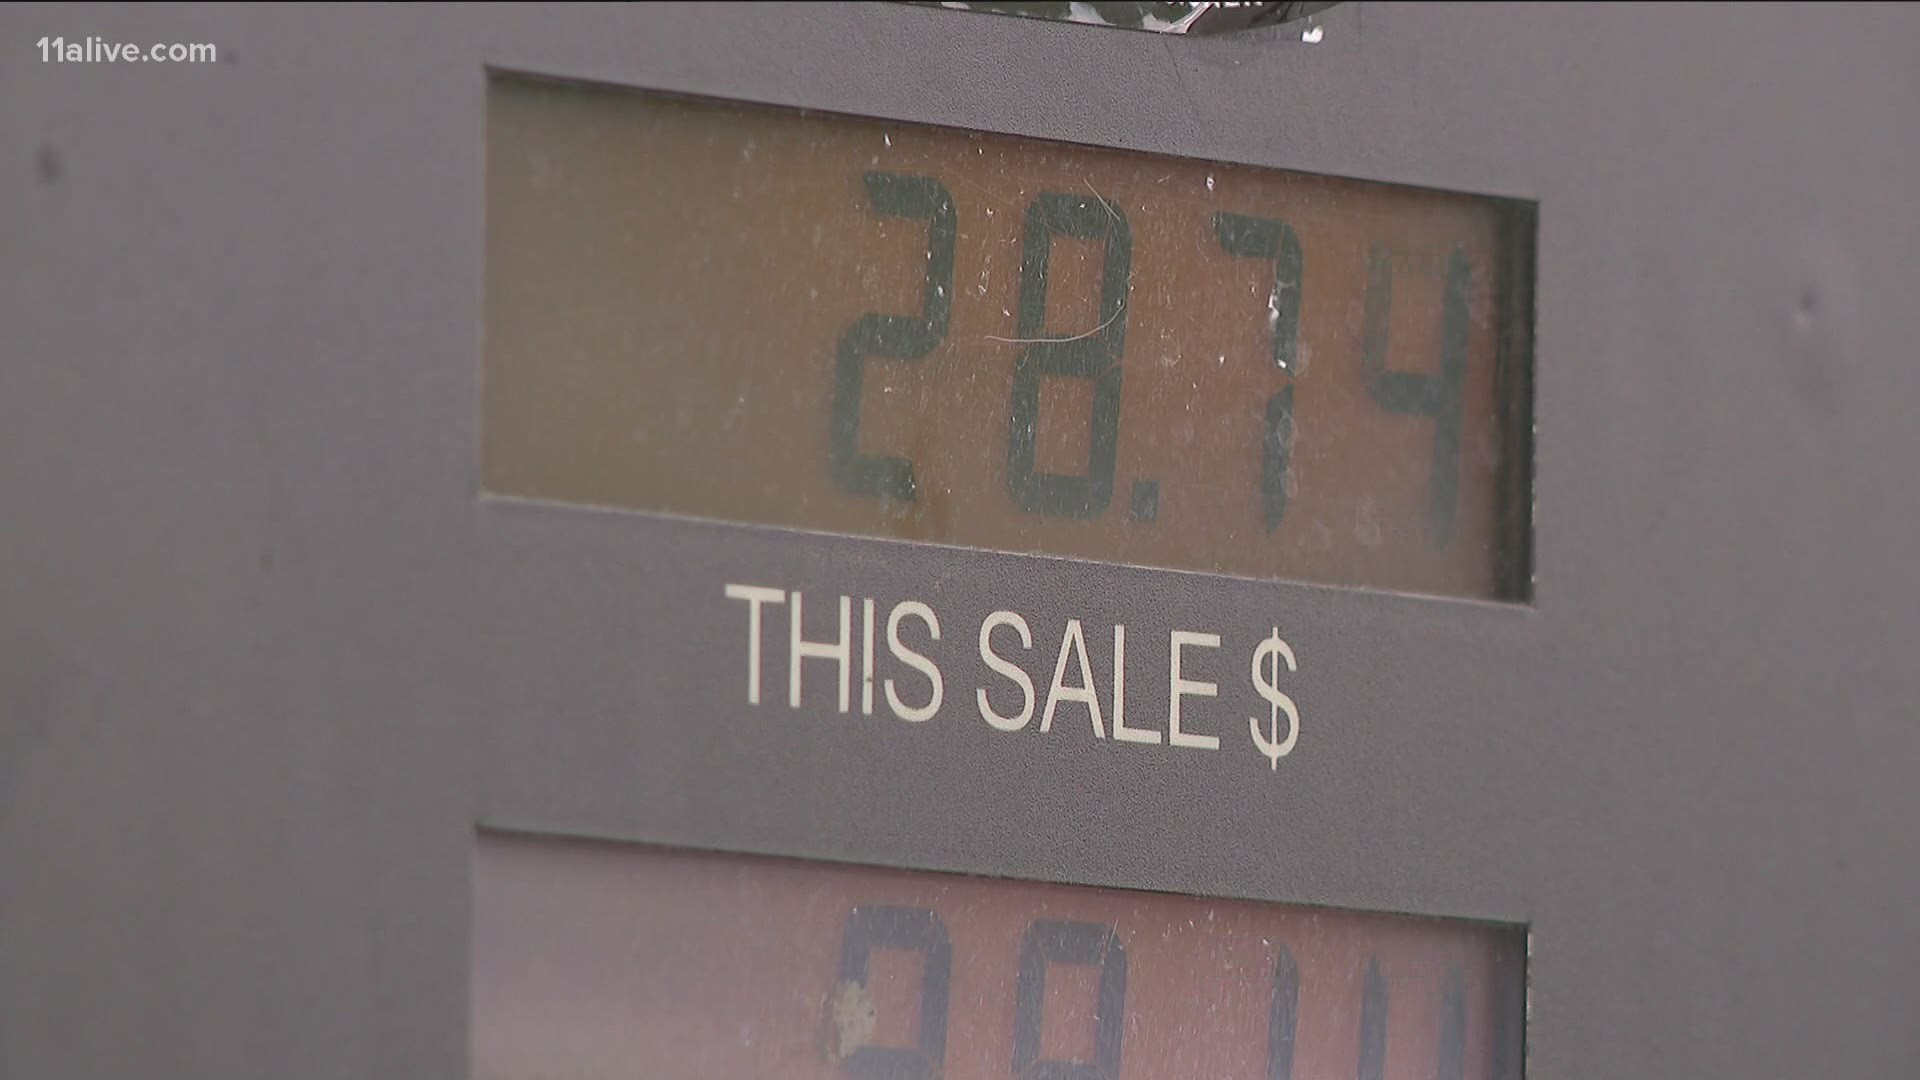 When it comes to the nation, Gas Buddy said more than 1,900 stations are back with more gas to sell.